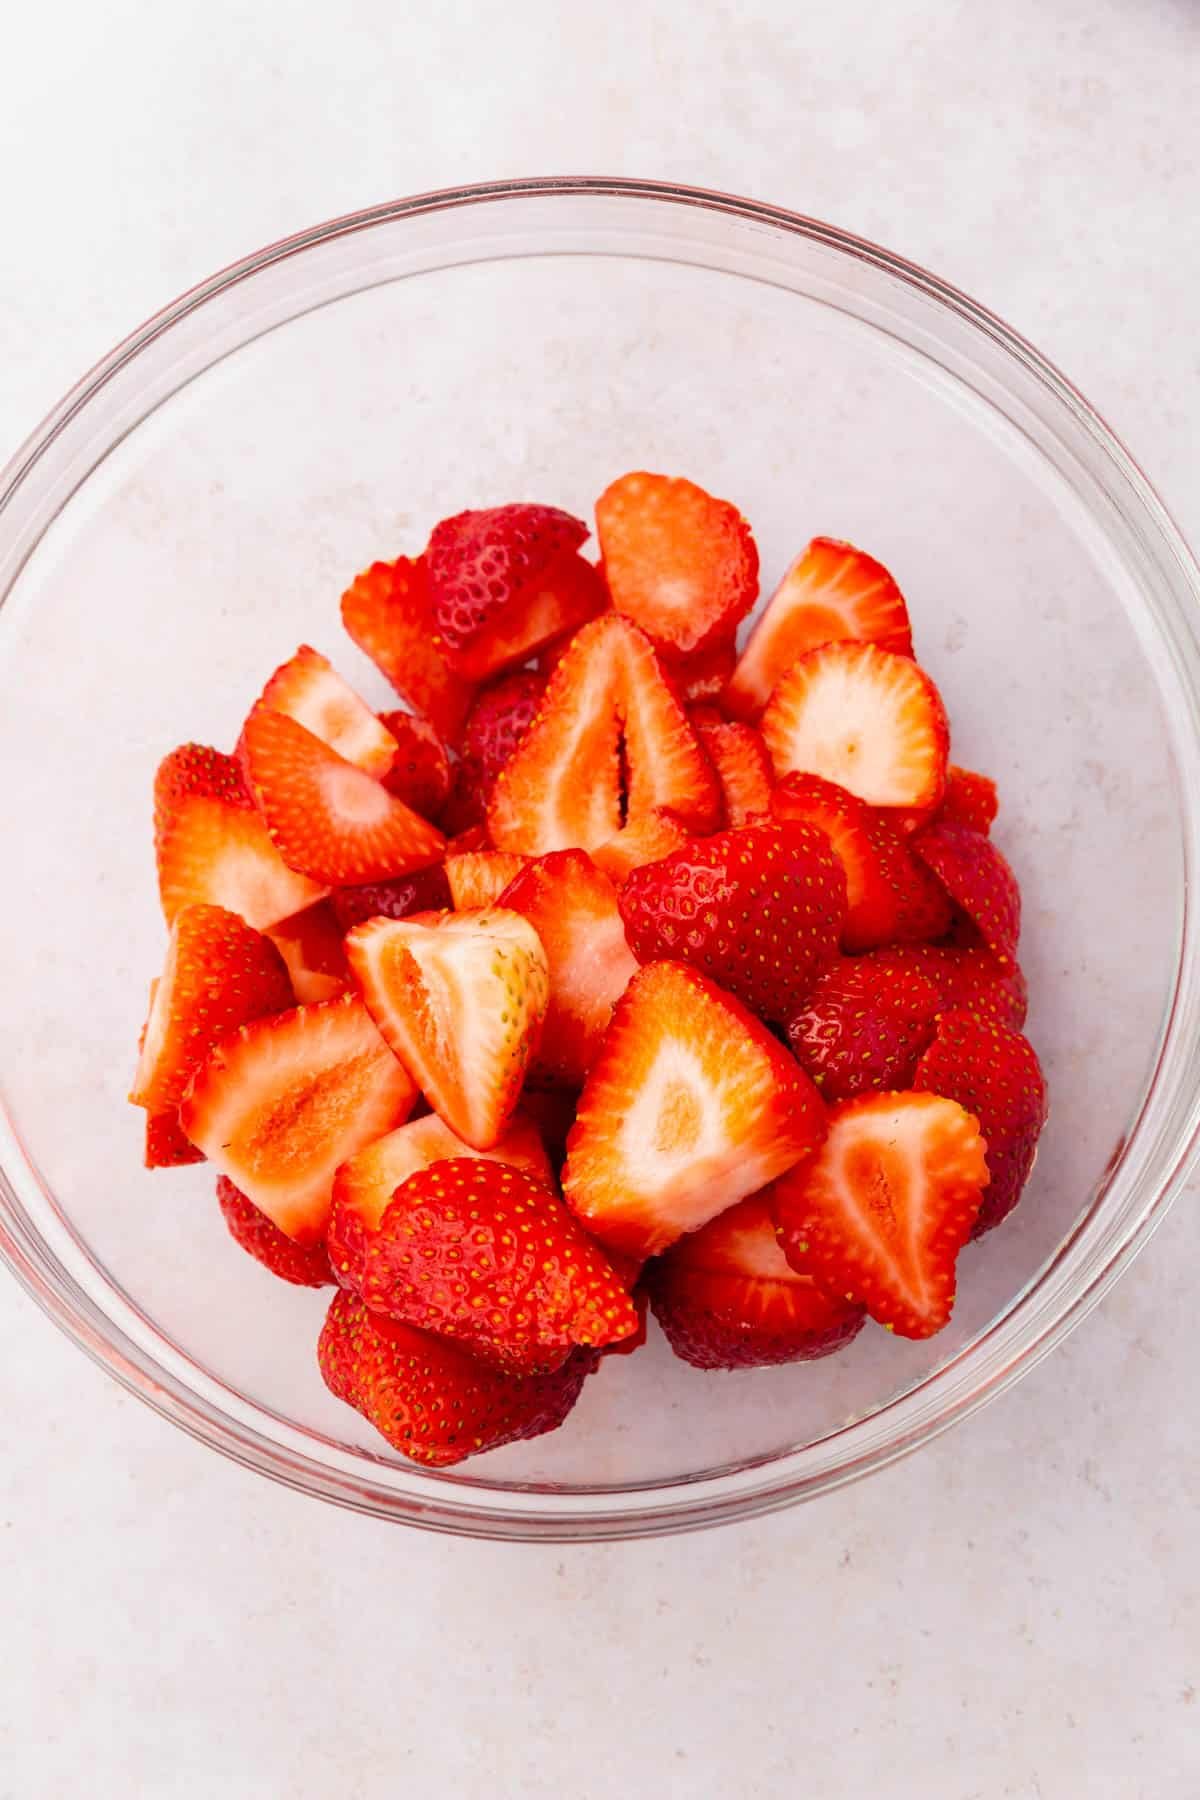 A glass mixing bowl with sliced strawberries in it.